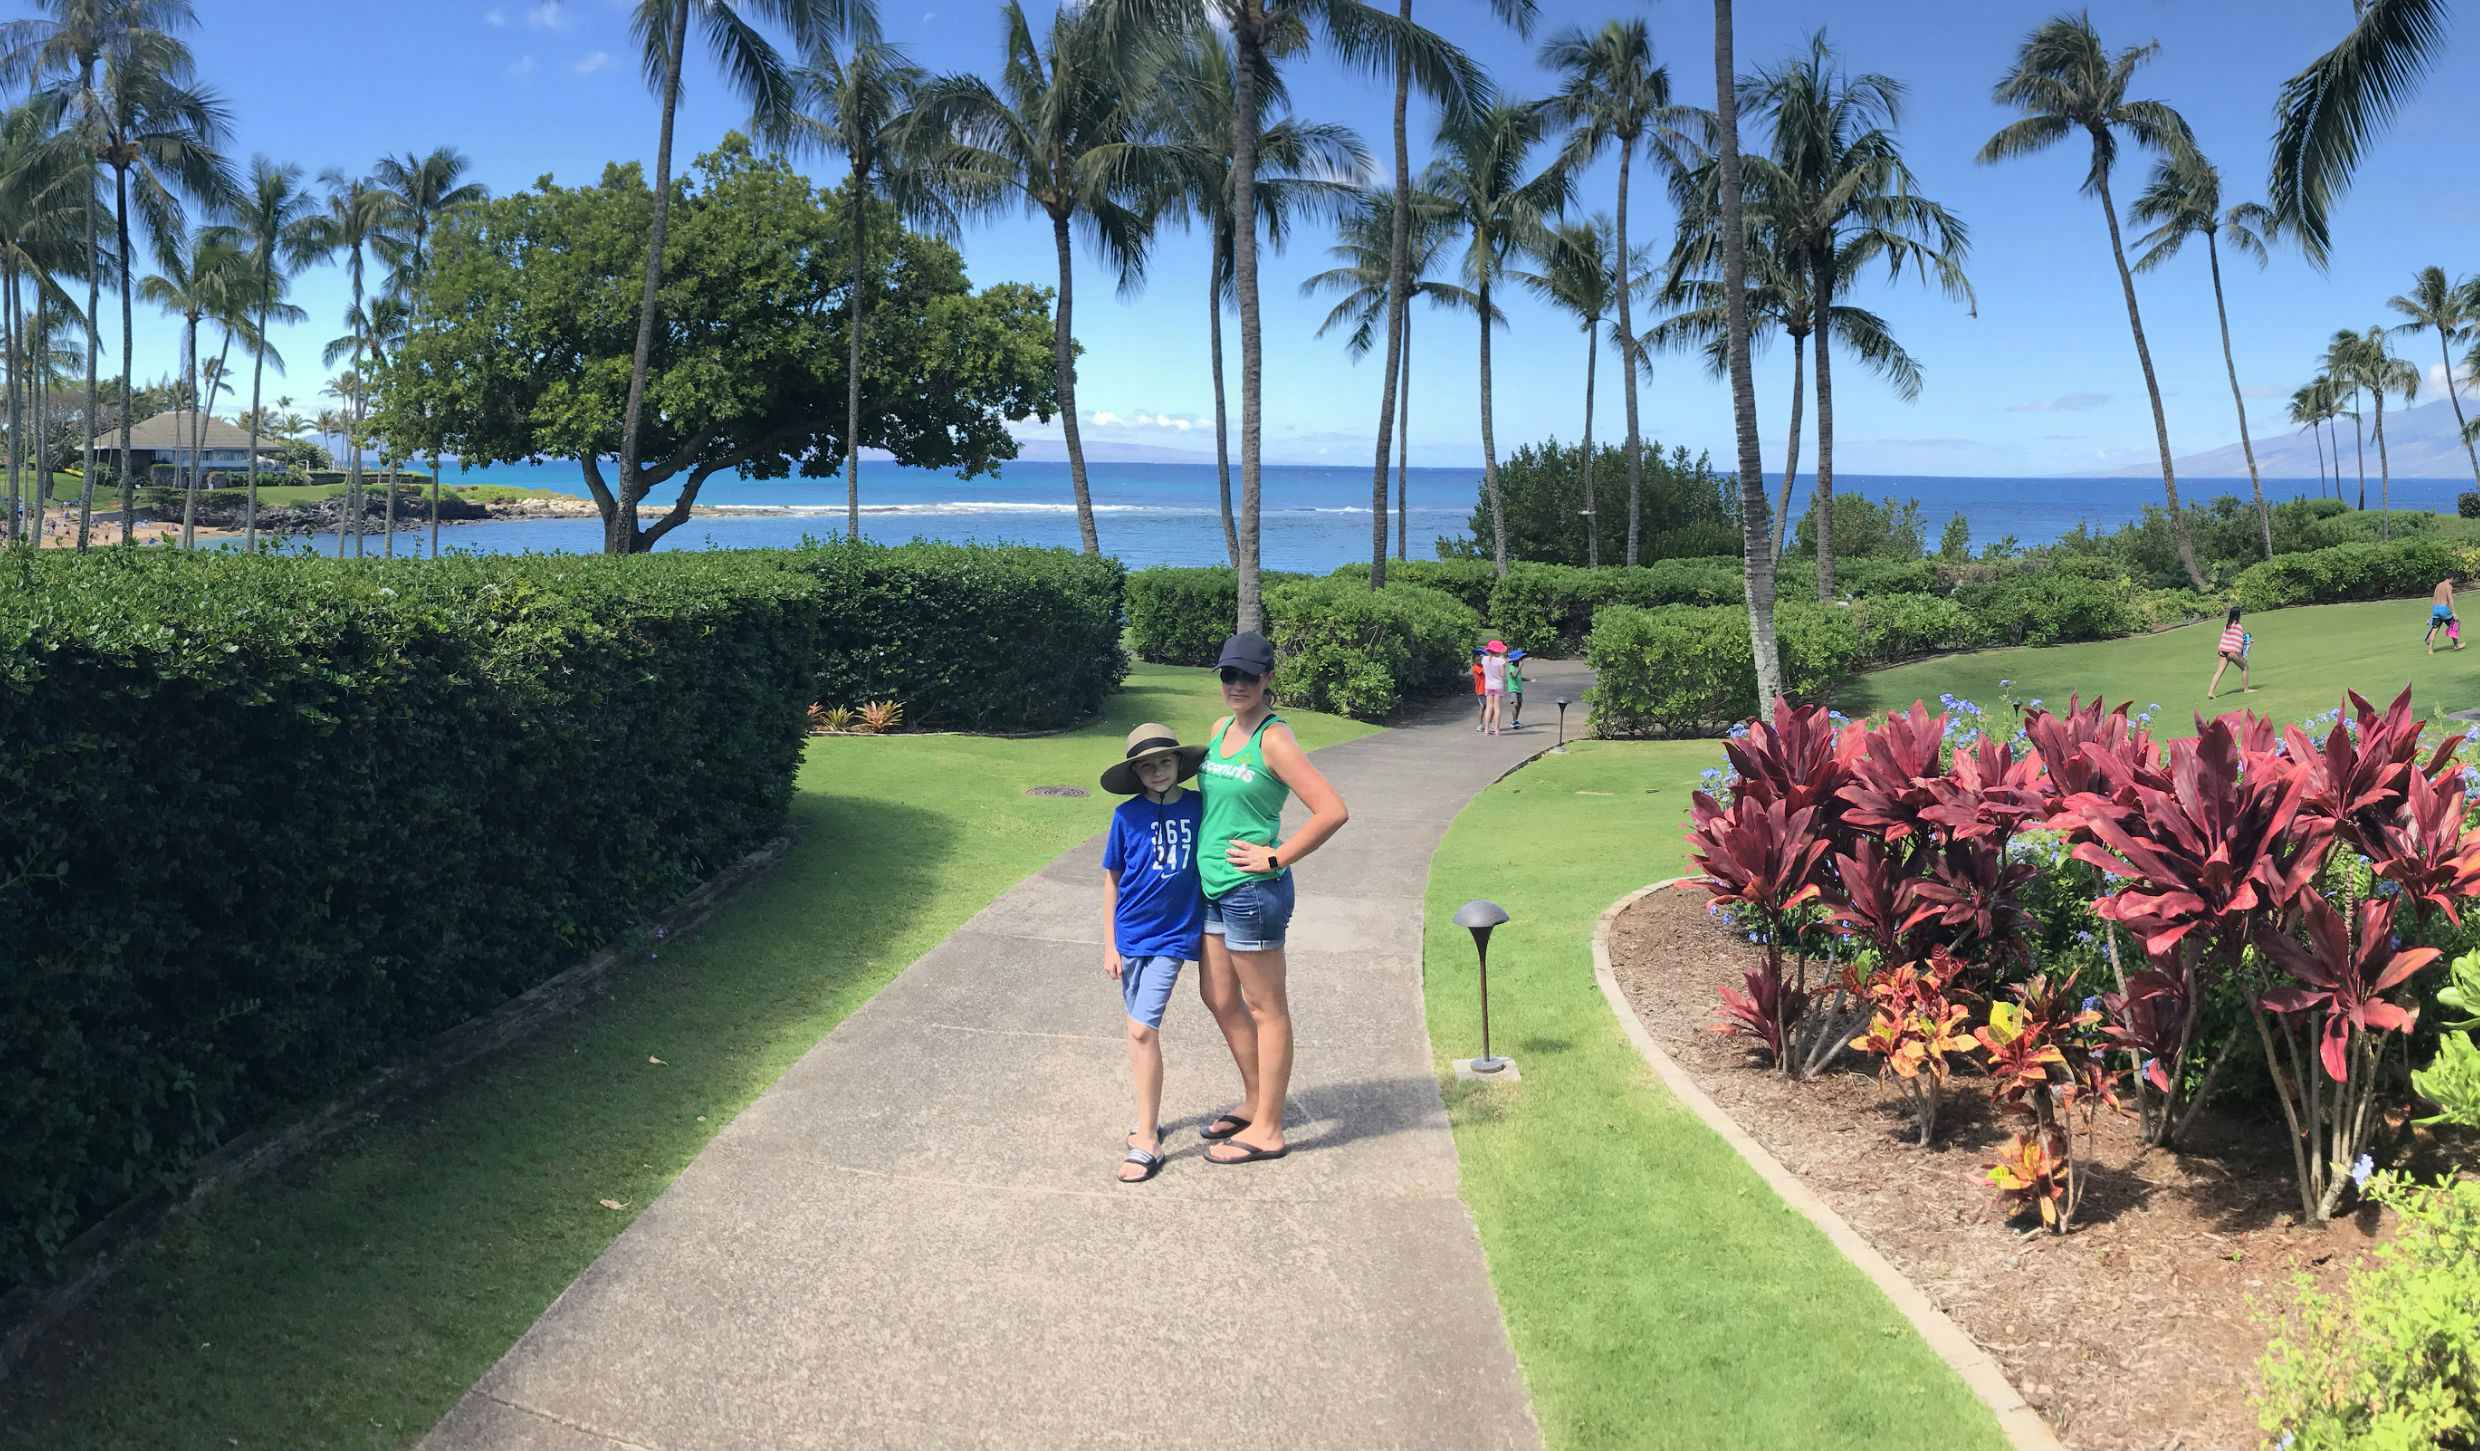 Woman and boy posing in front of the ocean in a tropical location.